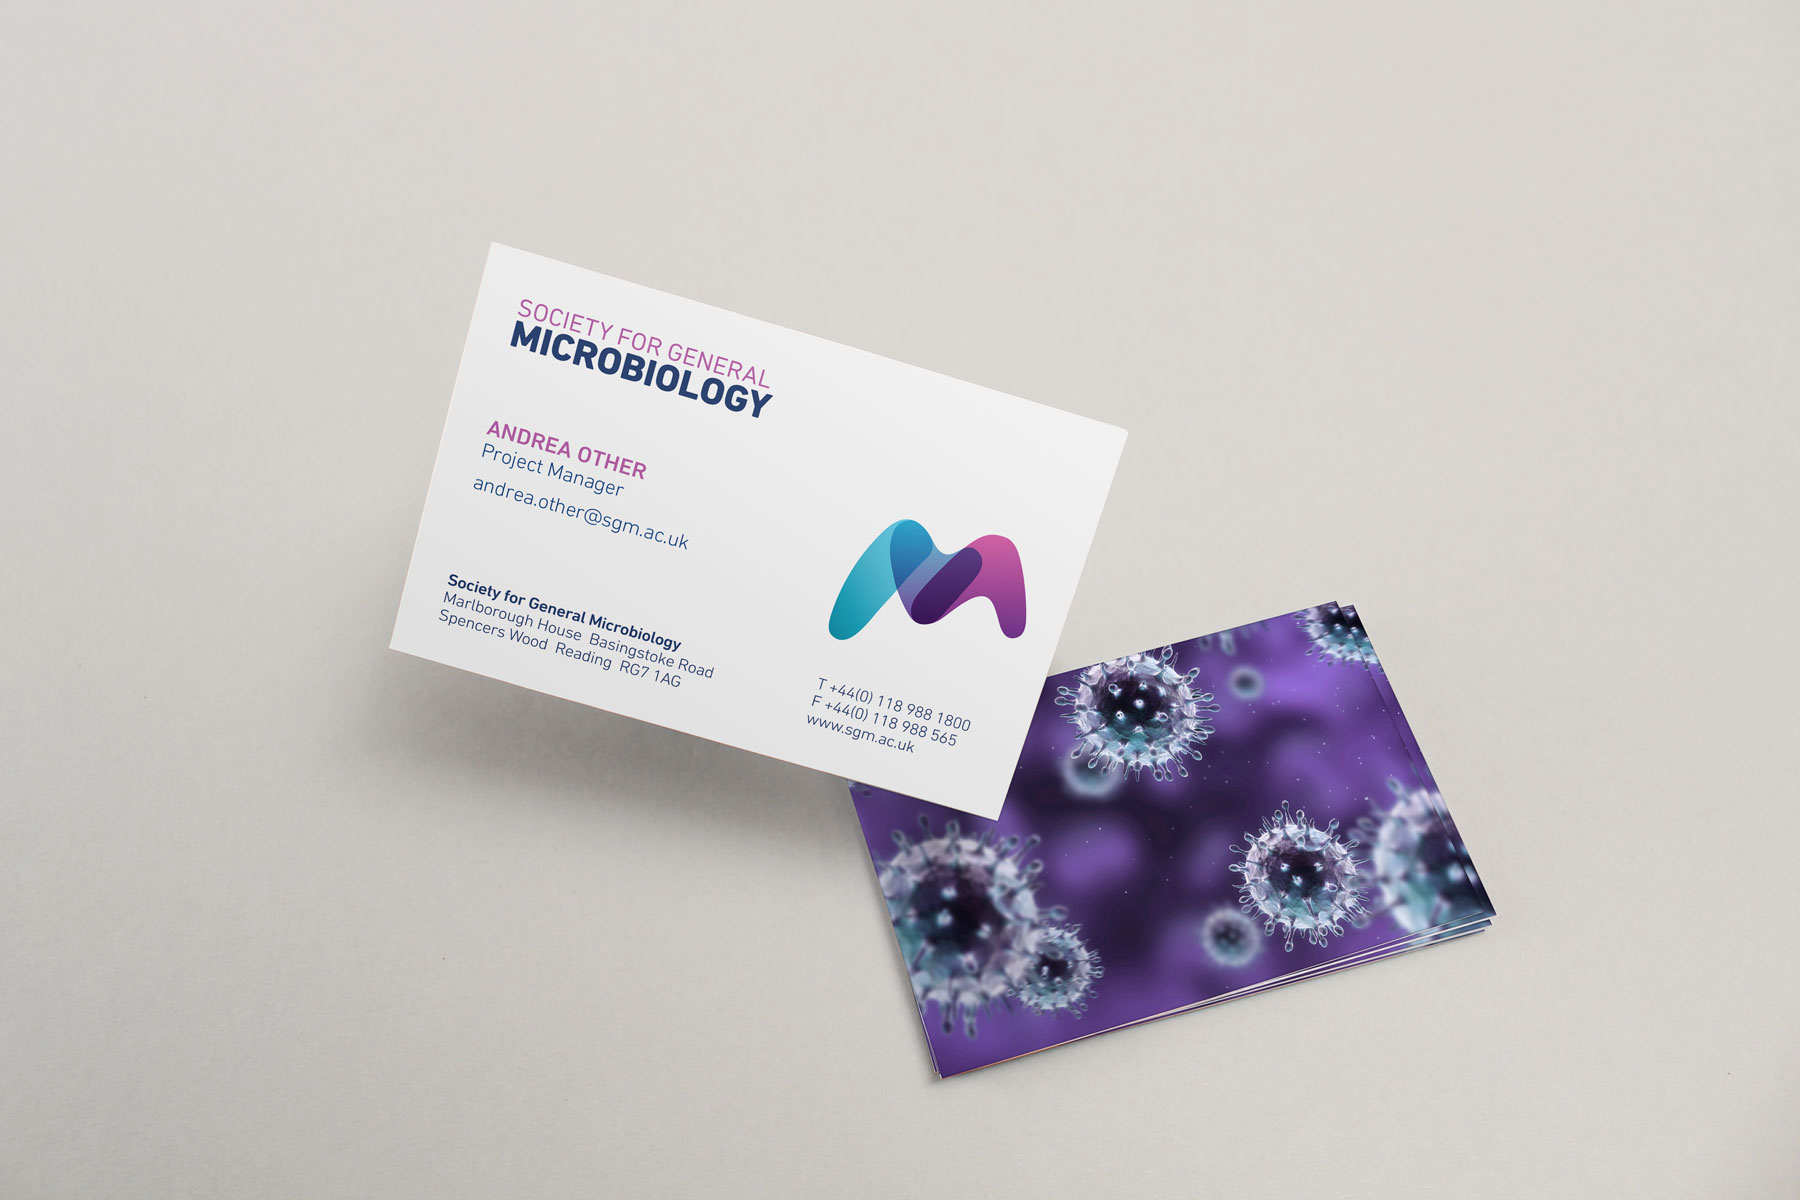 The business card demonstrates how the brand can be distilled into a more corporate environment.